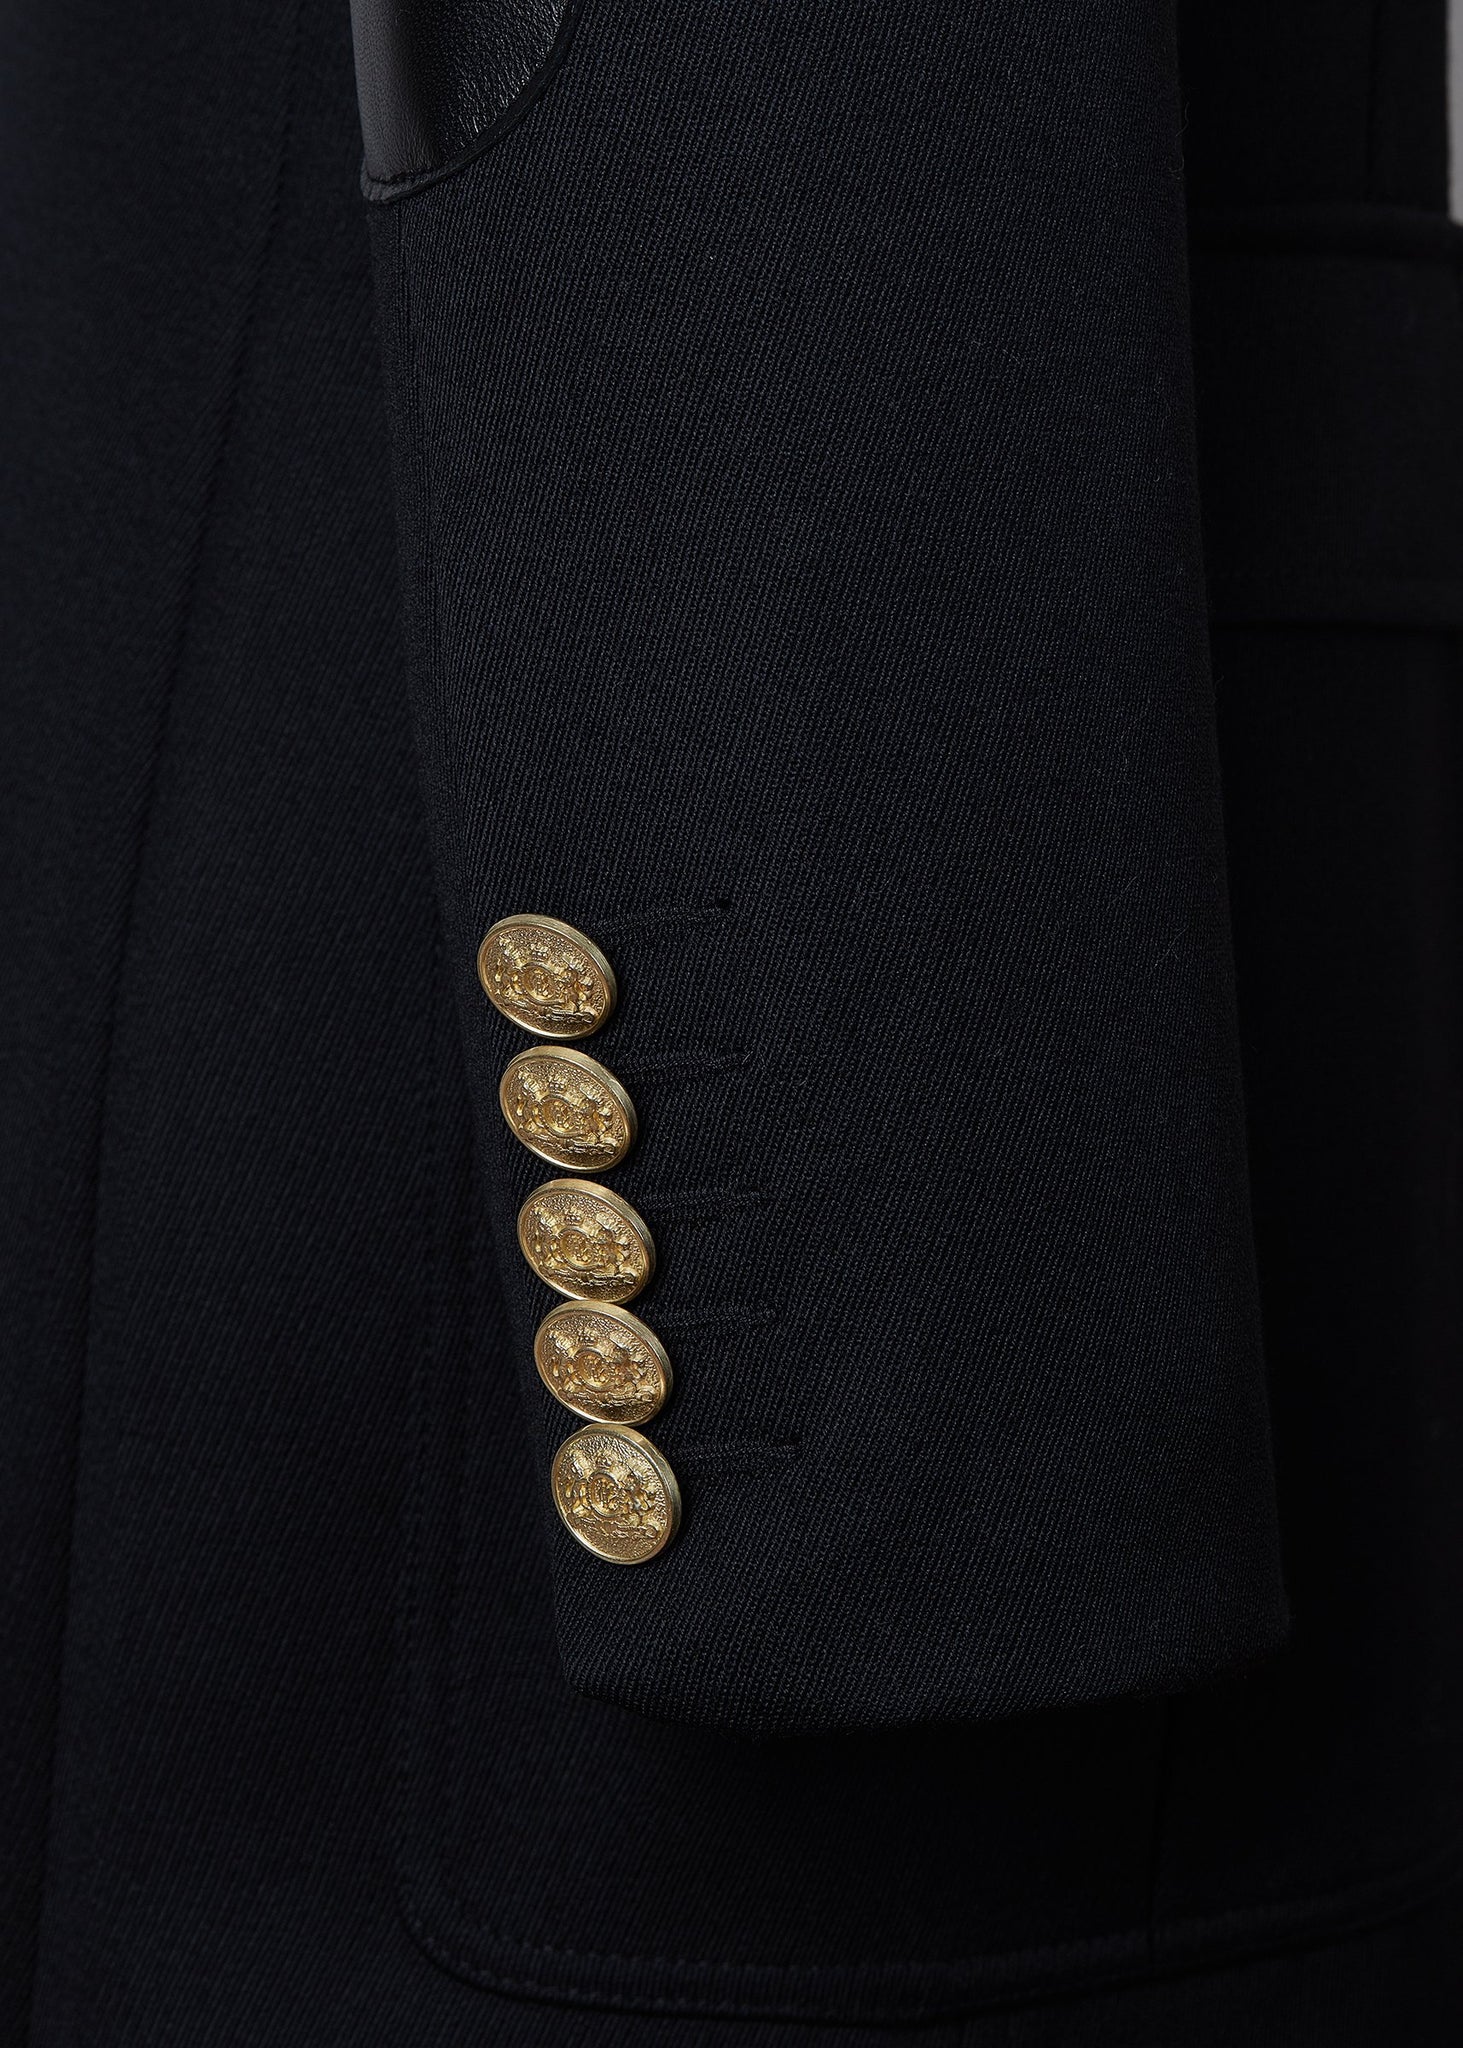 gold button detail on cuffs og relaxed fit single breasted blazer breasted blazer in black with patch pockets and tonal black leather elbow patches and collar